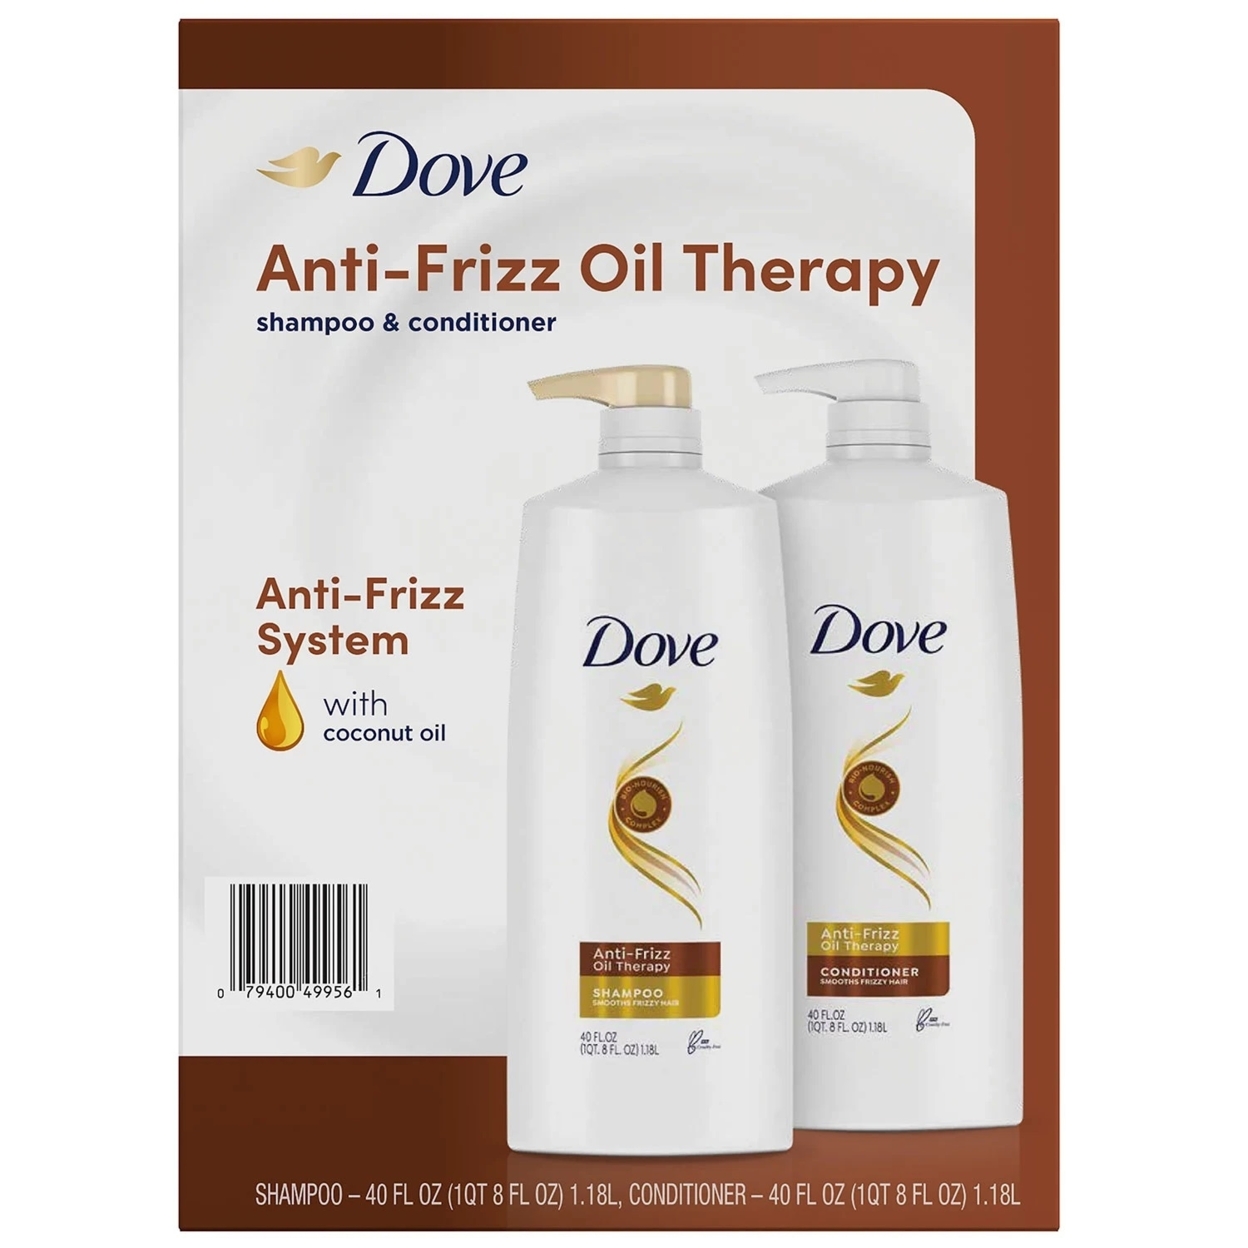 Dove Anti-Frizz Oil Therapy Shampoo & Conditioner, 40 Fluid Ounce (Pack Of 2)